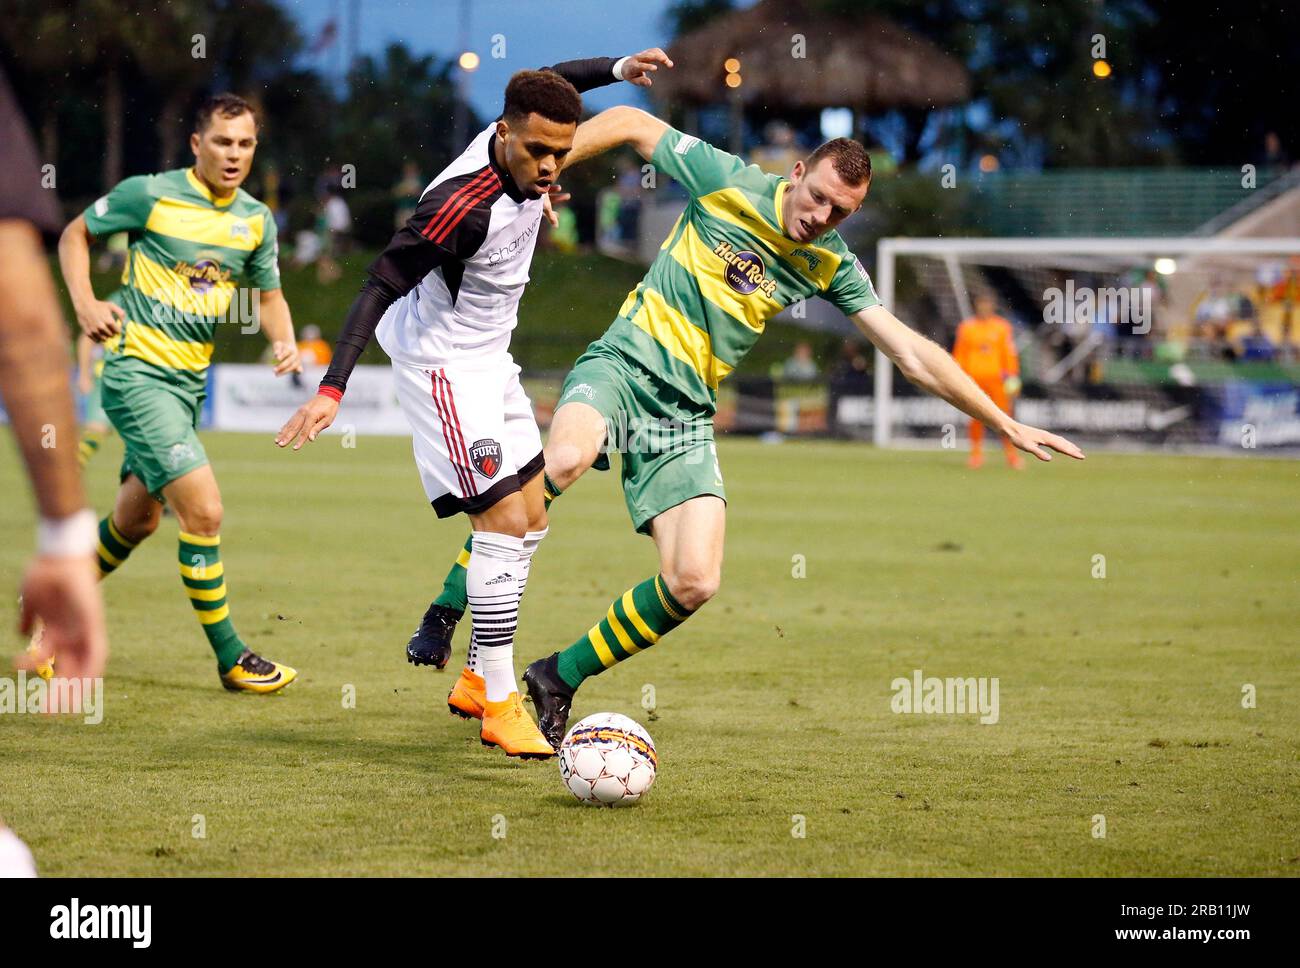 APRIL 7, 2018 - ST. PETERSBURG, FLORIDA: The Tampa Bay Rowdies Neill Collins during a match against Ottawa Fury FC at Al Lang Field. Collins was named the Head Coach at Barnsley F.C. on July 6, 2023. Stock Photo